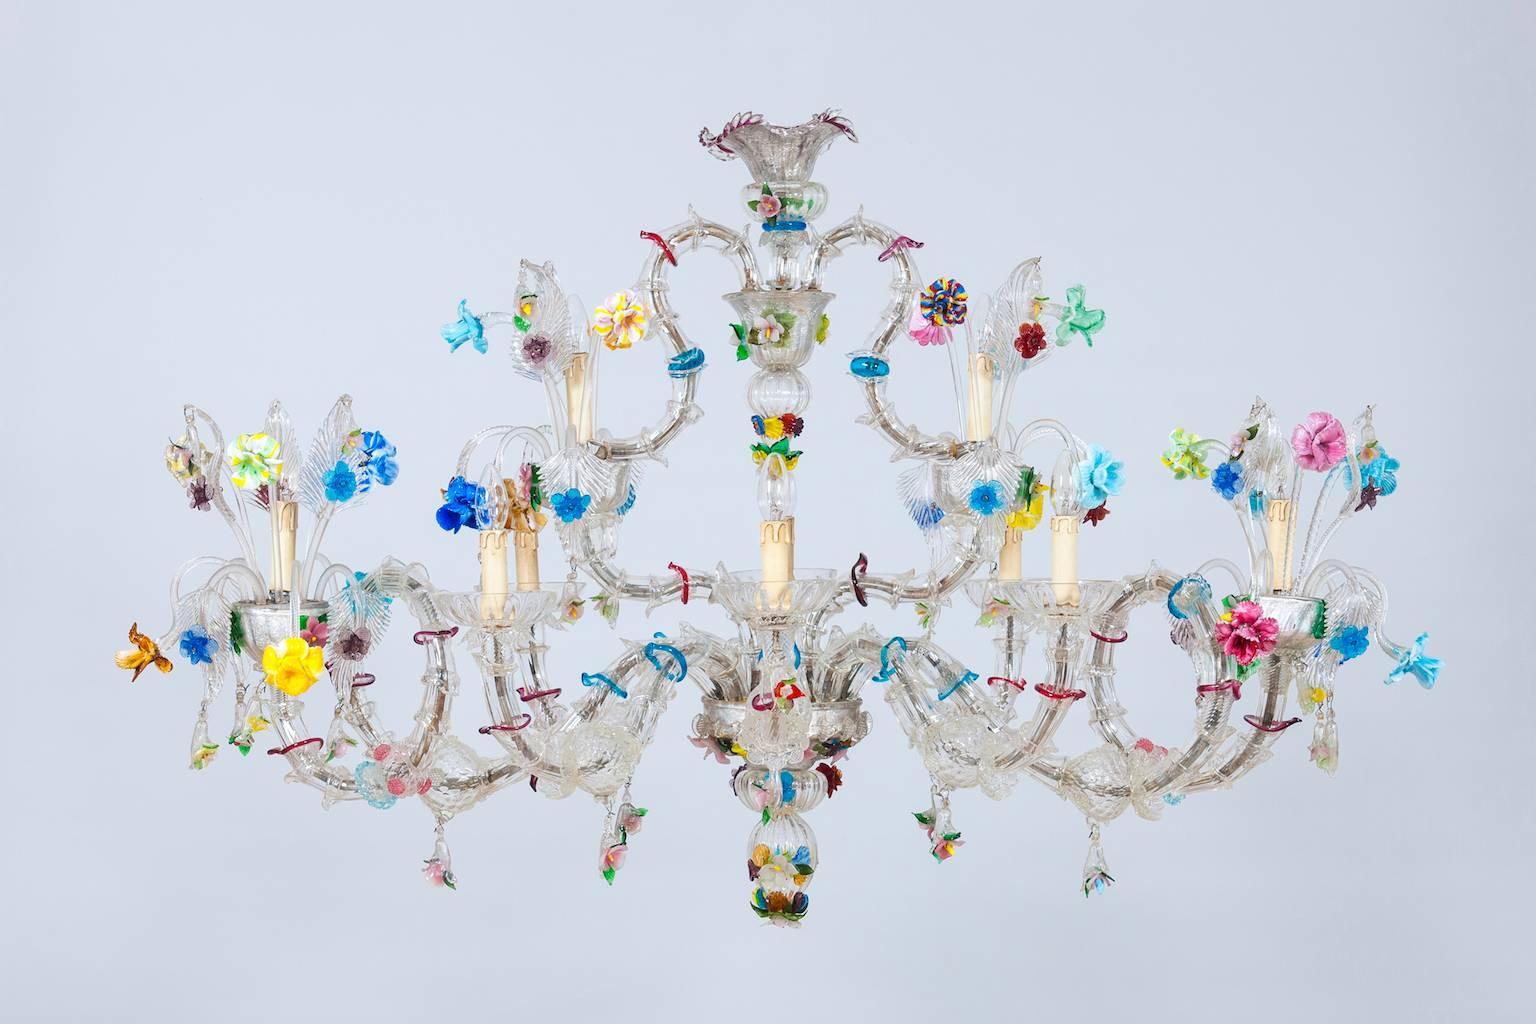 Elegant Murano Ca'Rezzonico Gondola chandelier in transparent color with multi-color refinishing, in excellent and original conditions.
This an exclusive production entirely handcrafted in the Venetian Murano Island of Venice.
The masterpiece is